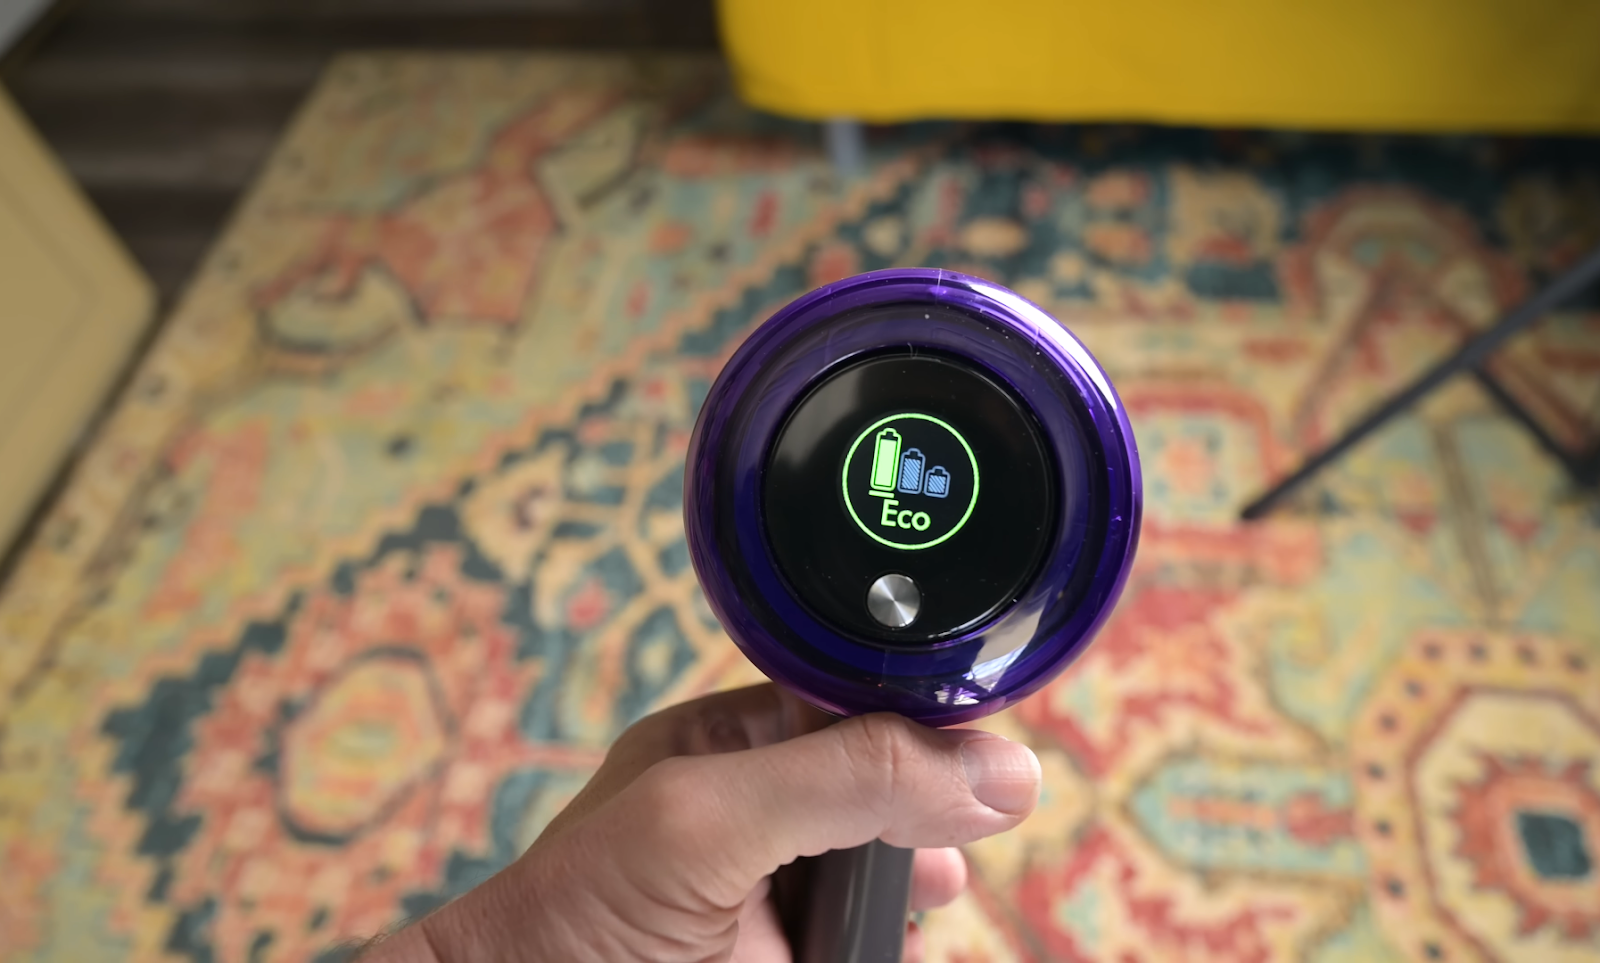 Close-up of the Dyson V11's handle showing the digital display with the battery level indicator set on Eco mode